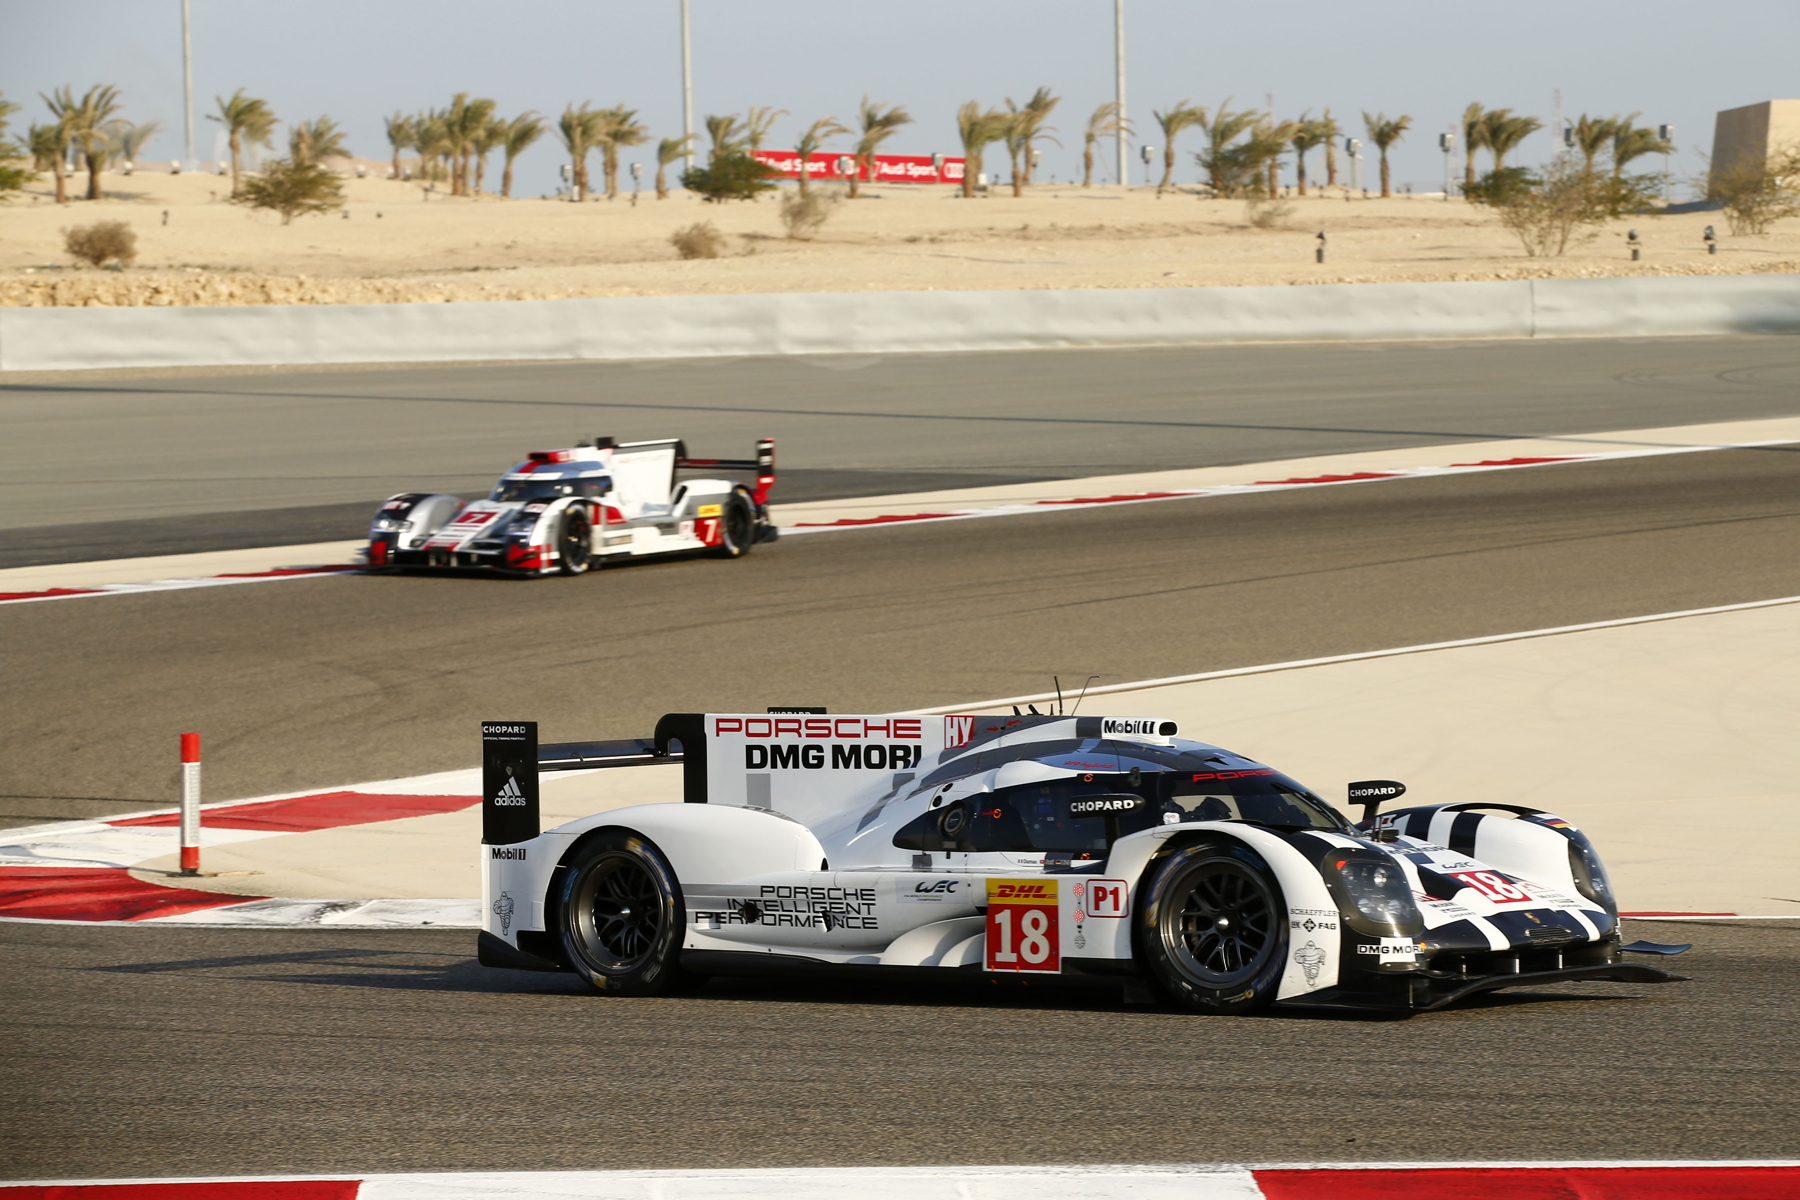 After difficulties for the no. 17 car, the sister entry was forced to battle with the no.7 Audi for a crucial victory in Bahrain.